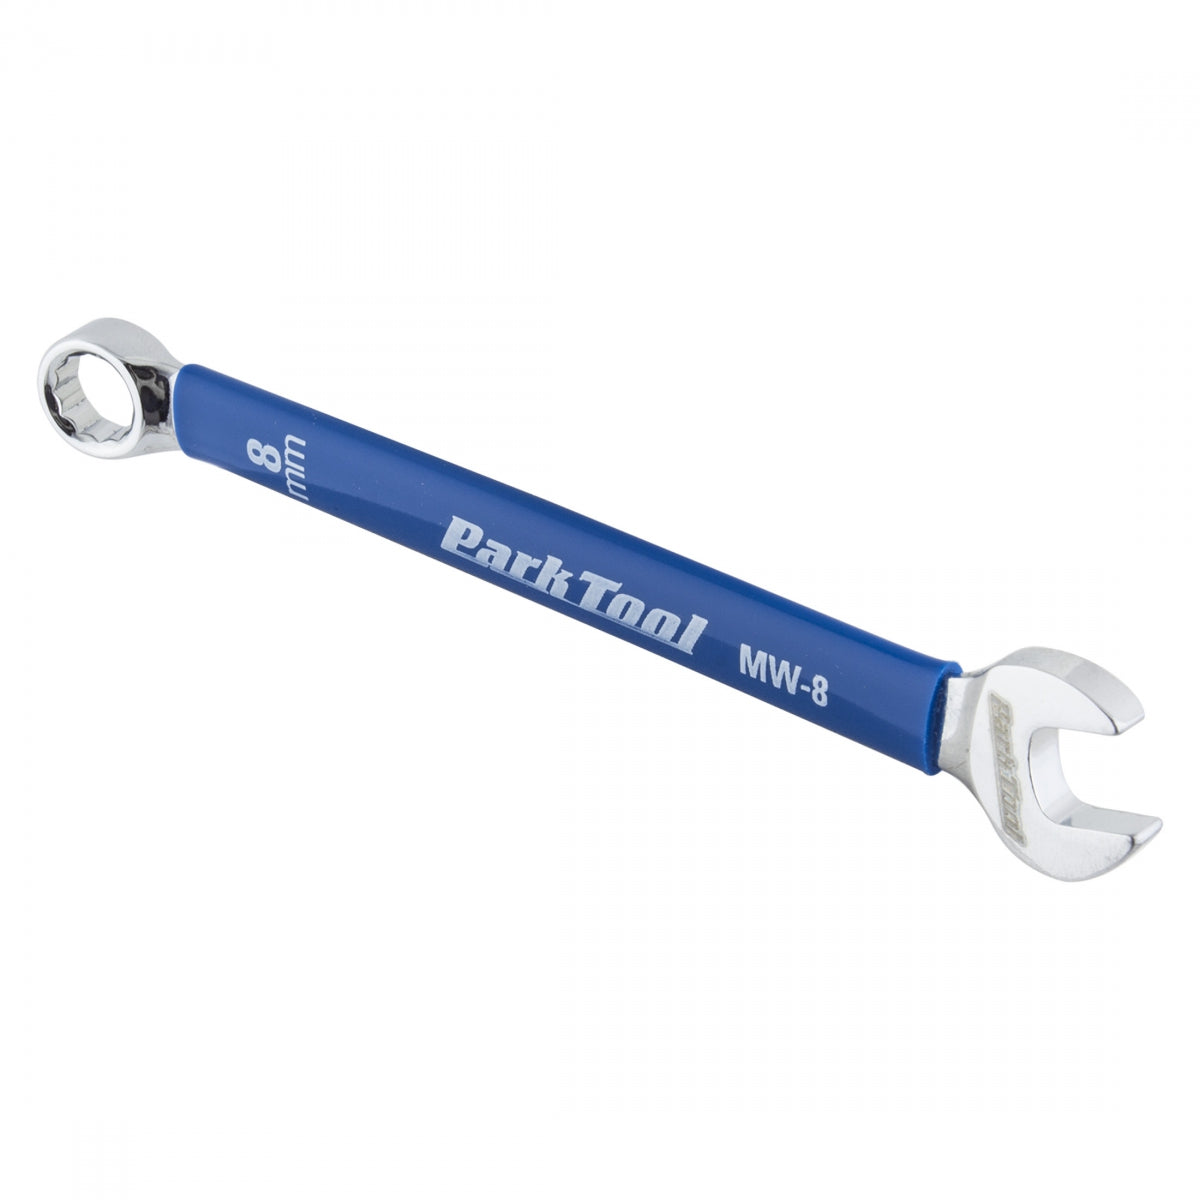 Park Tool #MW-8 Metric Wrench, 8mm